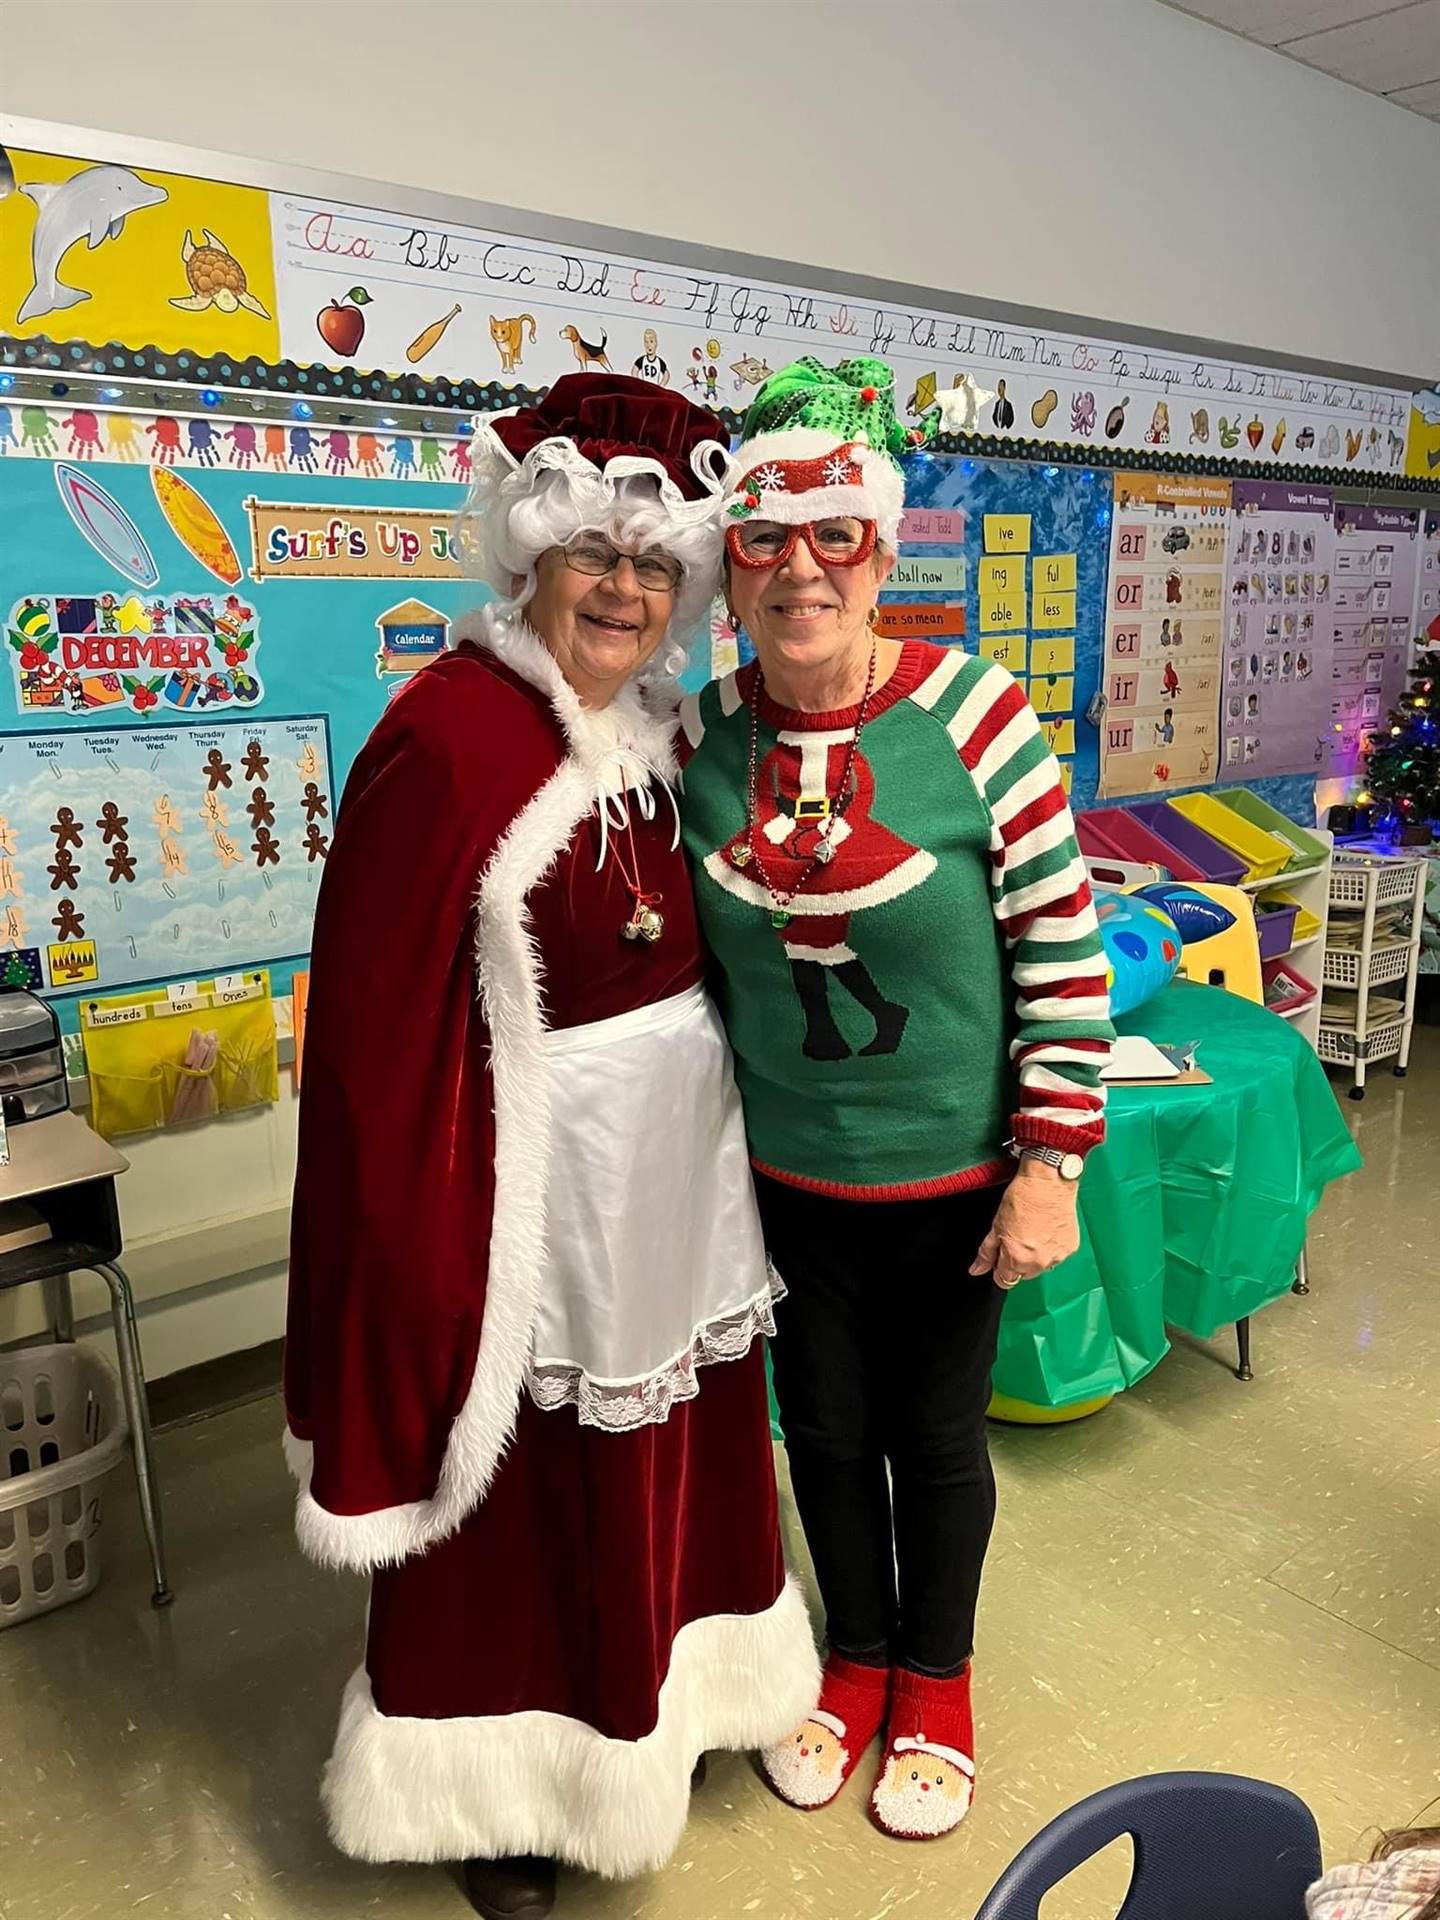 Mrs. Claus and her "Elf" came to visit Kindergarten